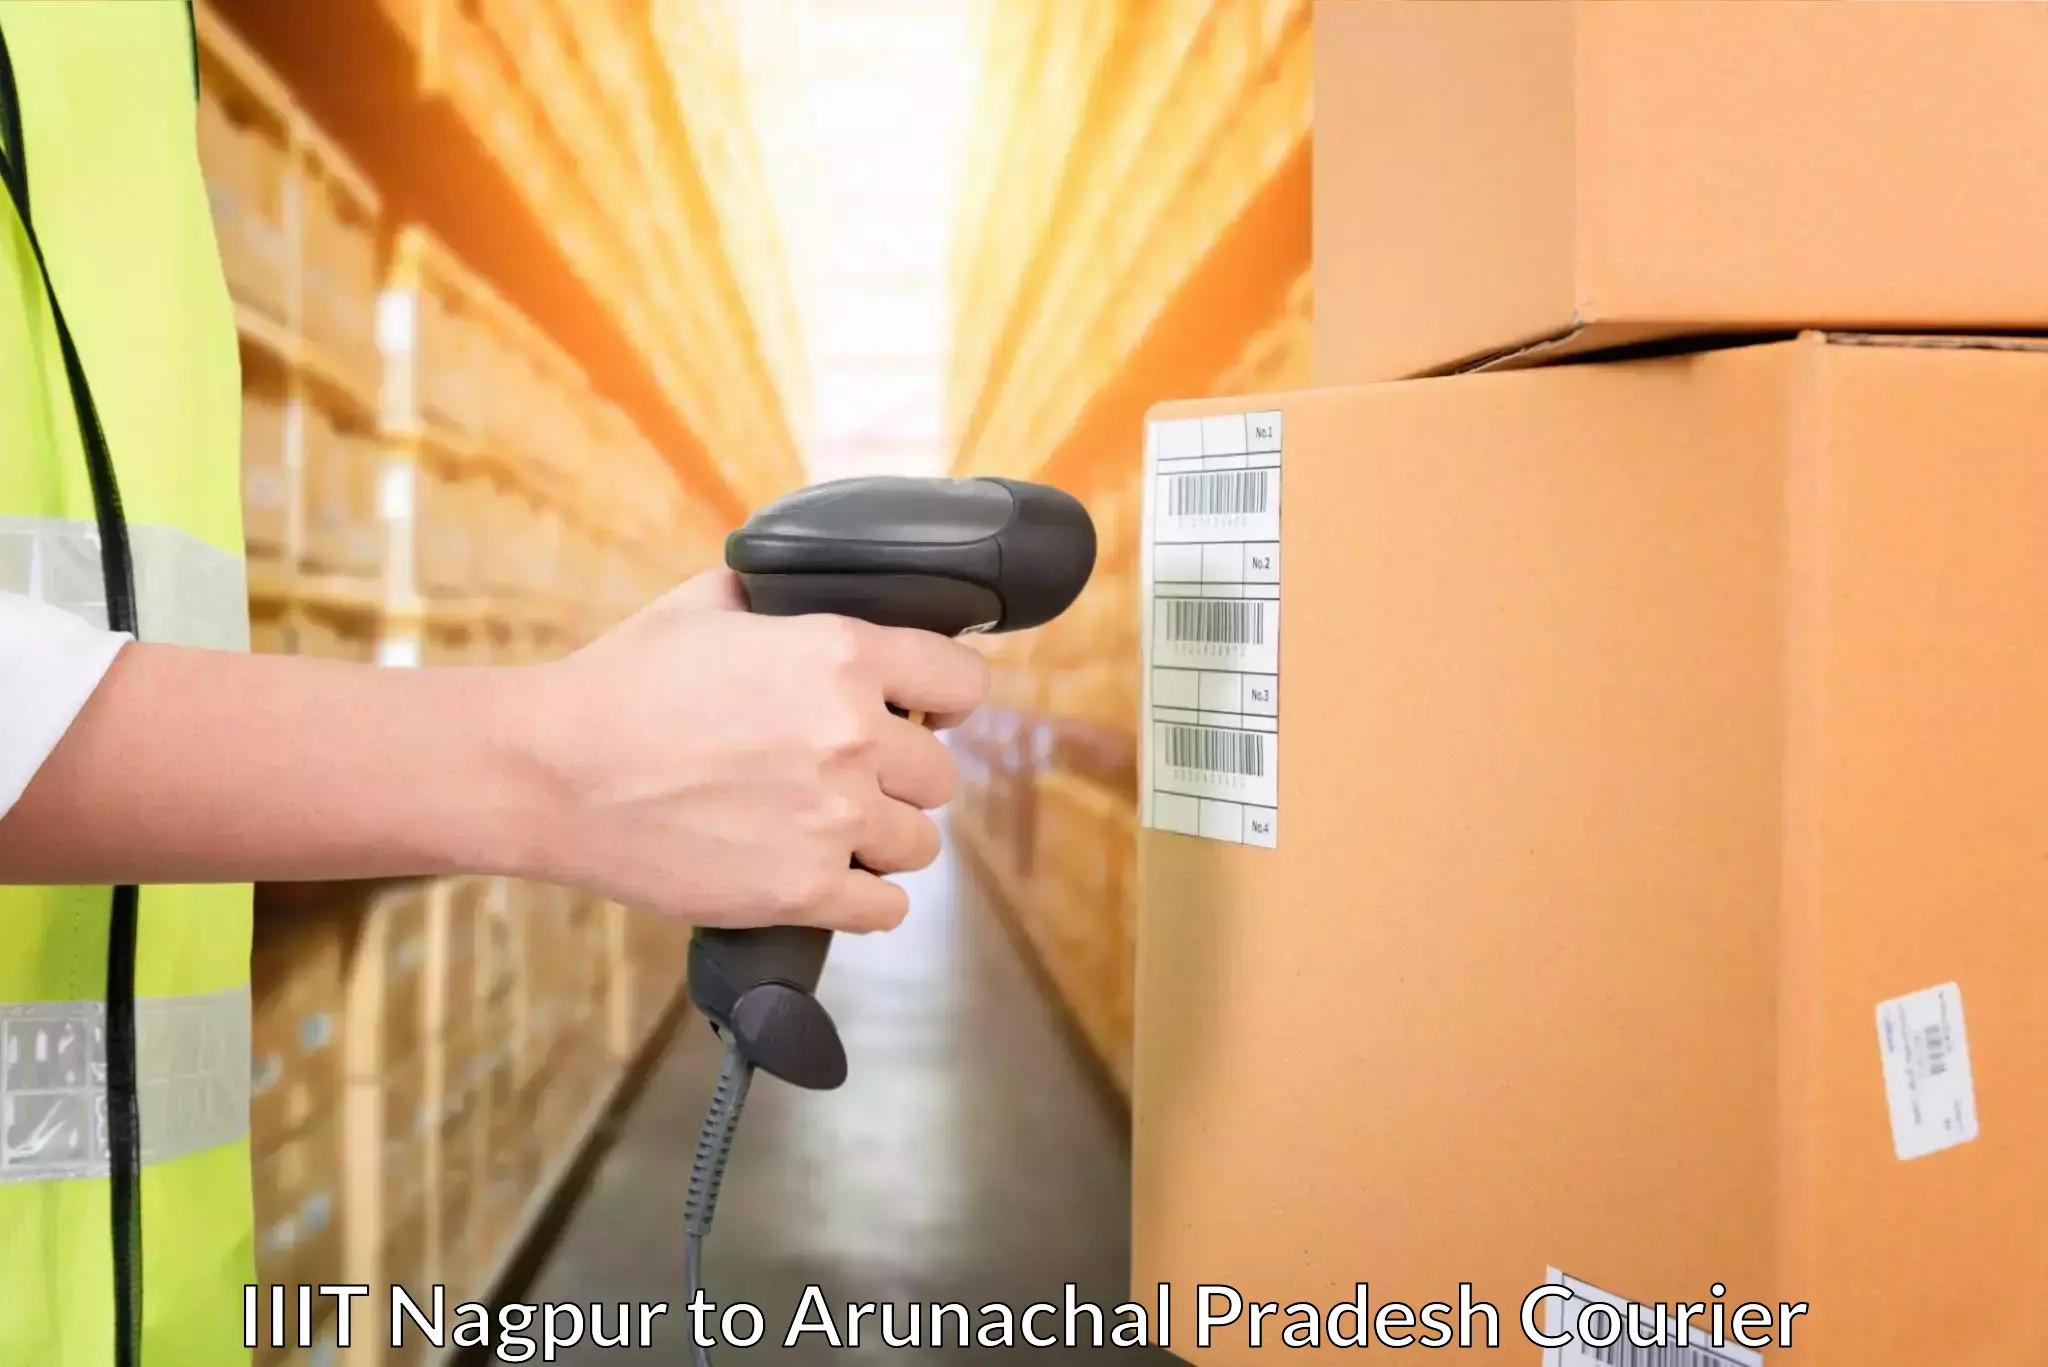 Specialized shipment handling IIIT Nagpur to Tirap